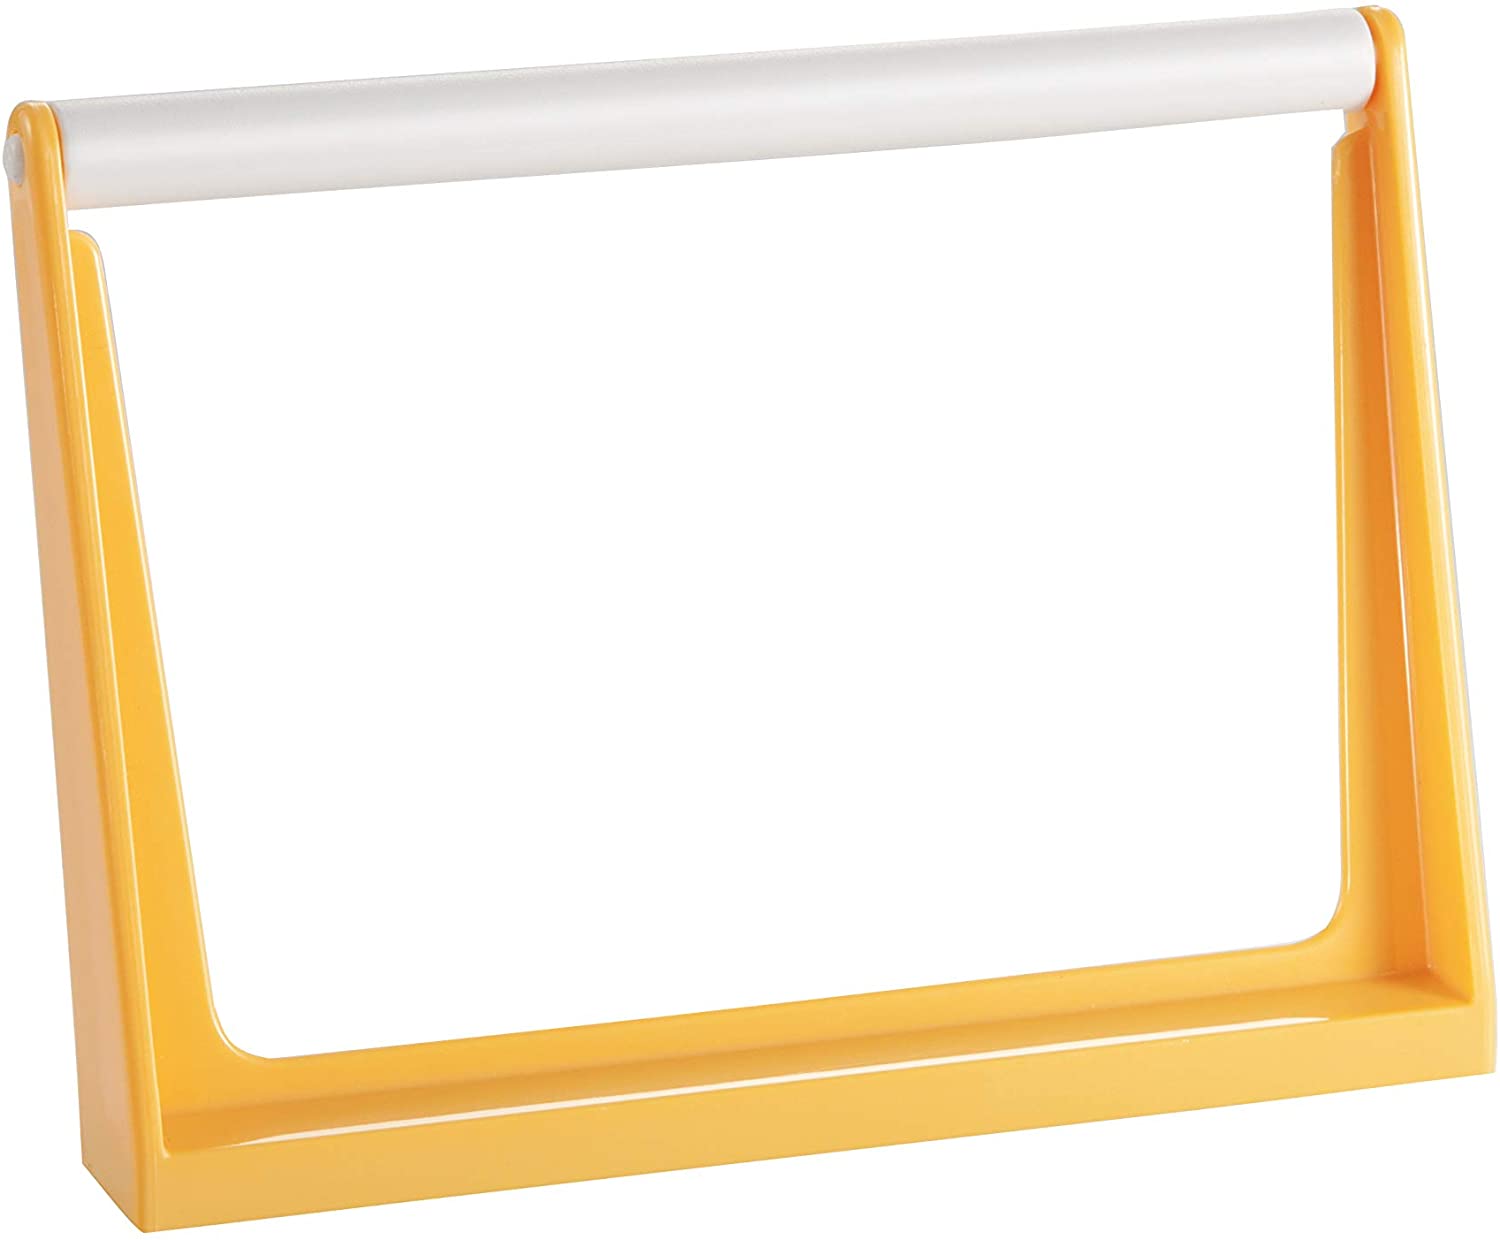 Tescoma 630855 Pasta Delicia Charger Plastic, Yellow